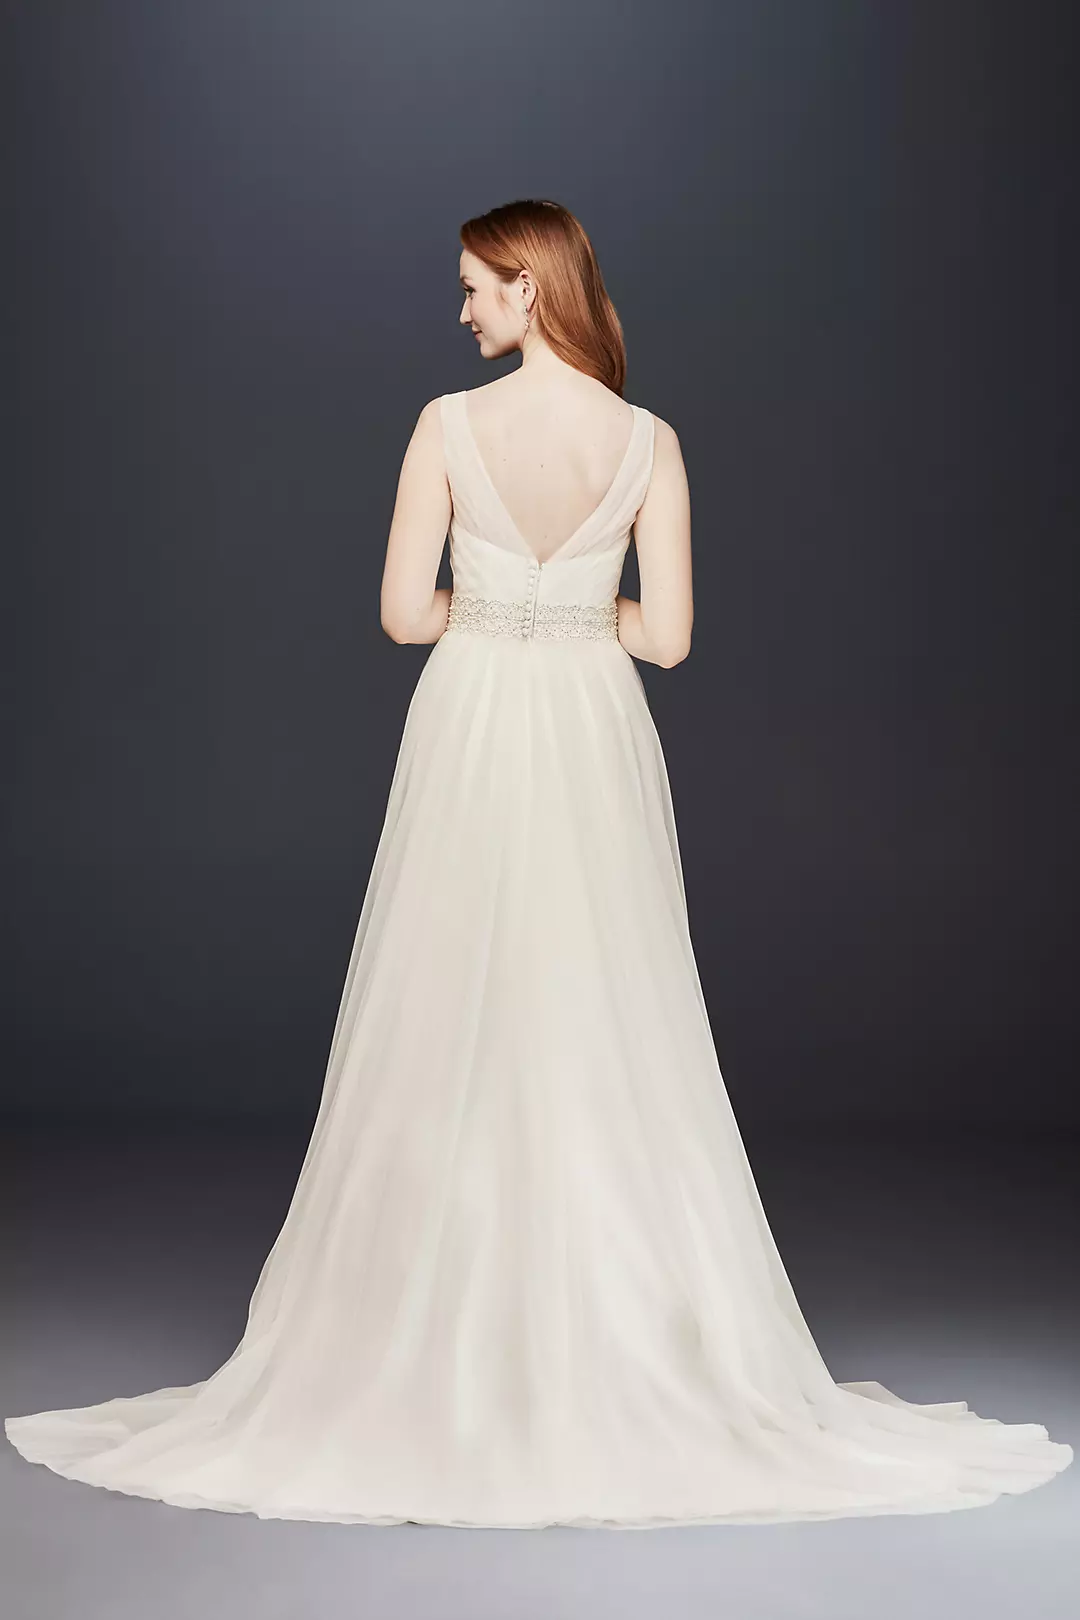 Tulle A-Line Wedding Dress with Beaded Waist Image 2